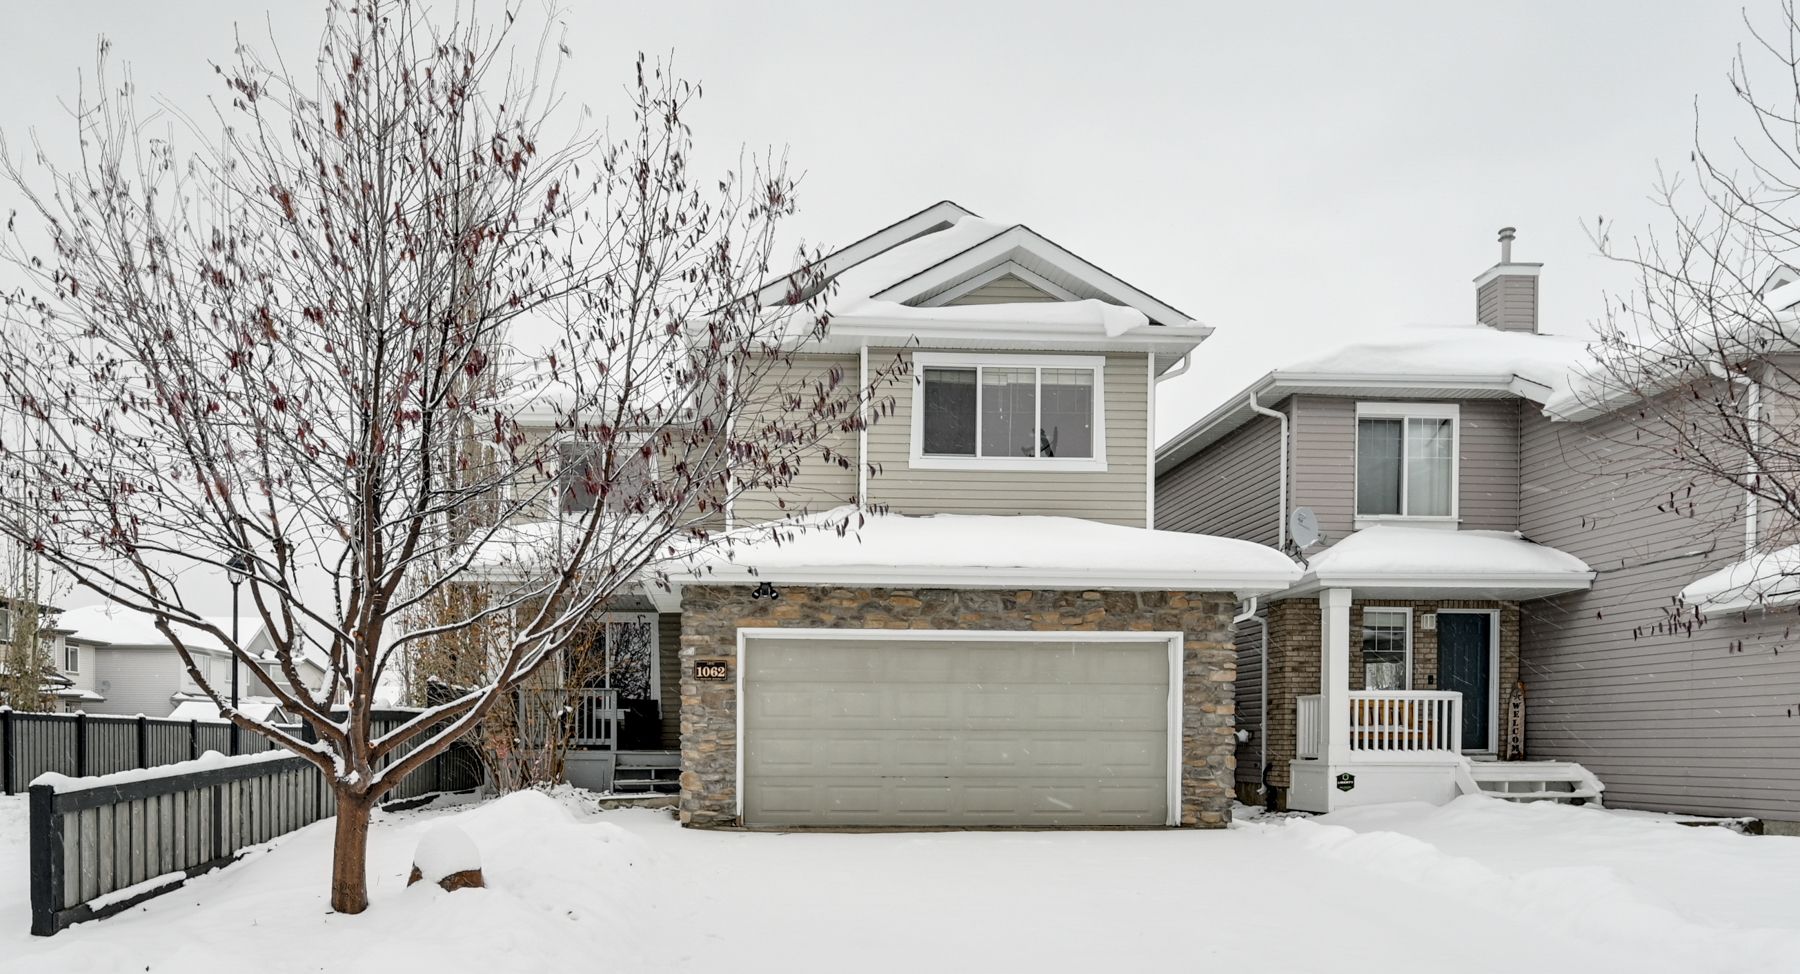 I have sold a property at 1062 Mckinney GREEN in Edmonton
